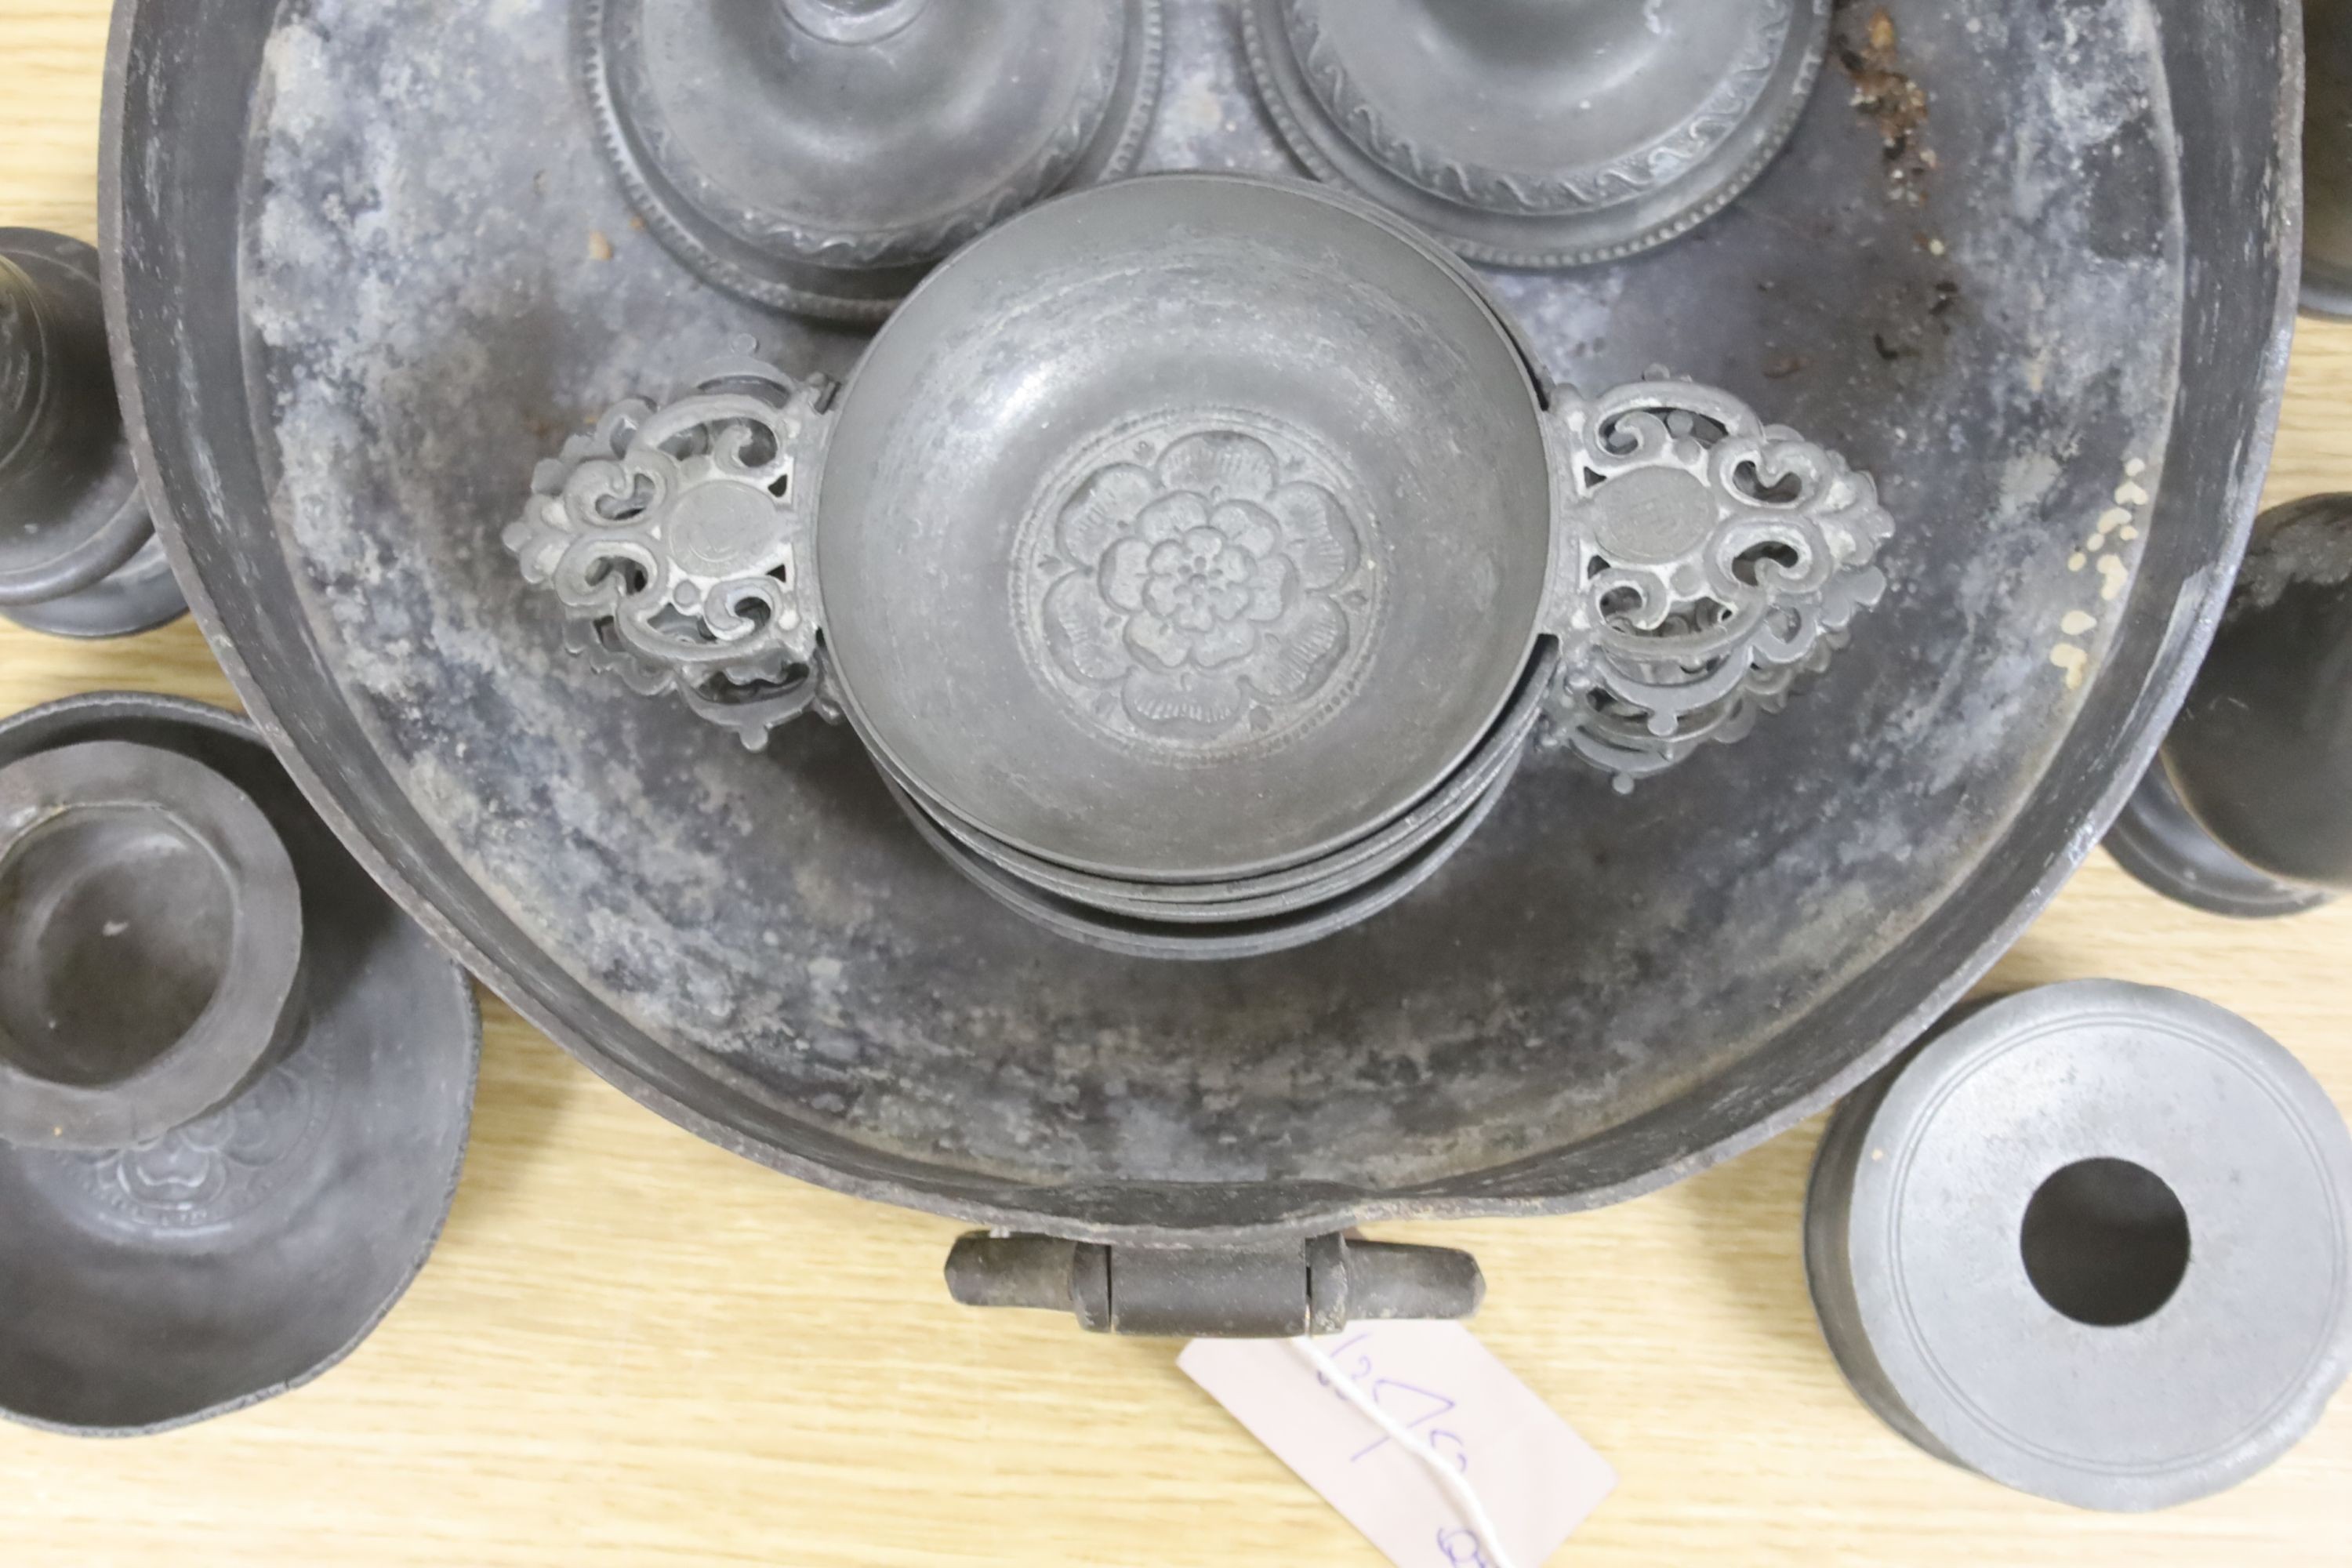 A collection of Dutch antique pewter, including two-handled bowl, wine taster, measures, etc.